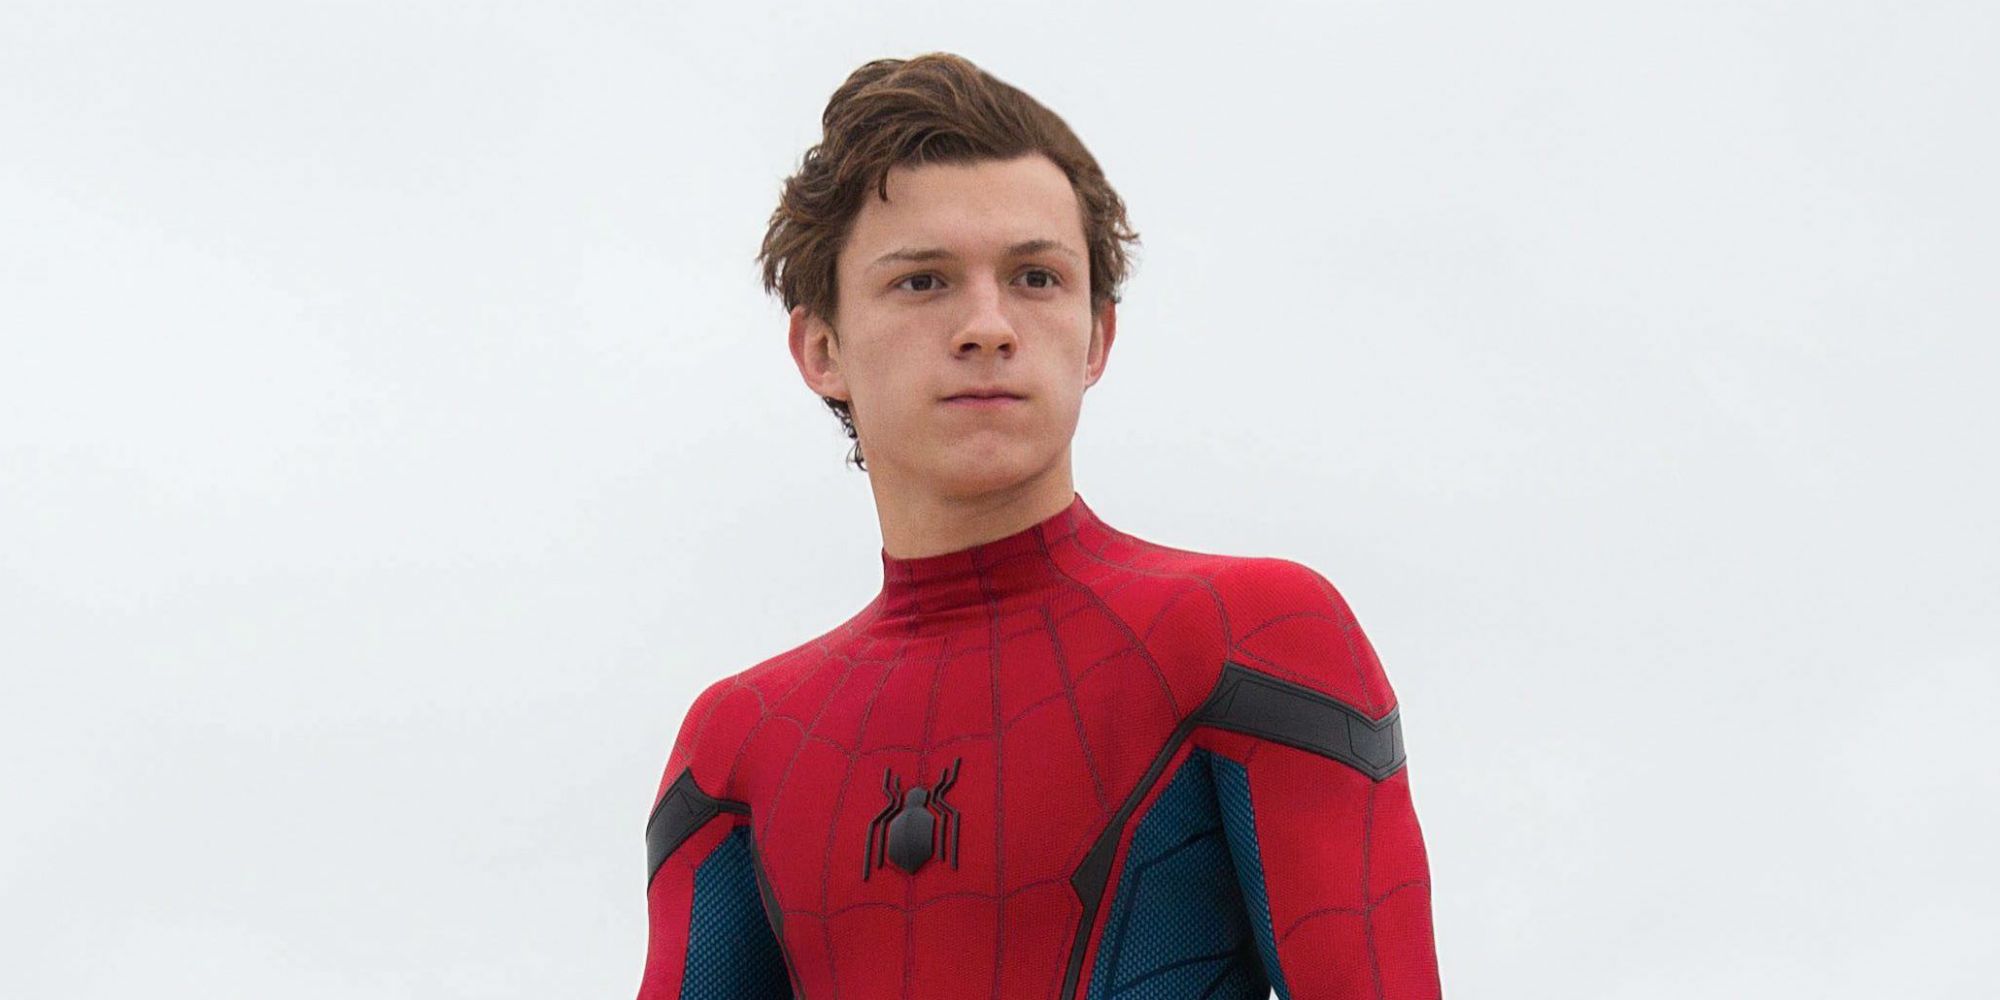 Spider-Man without his mask in Homecoming.